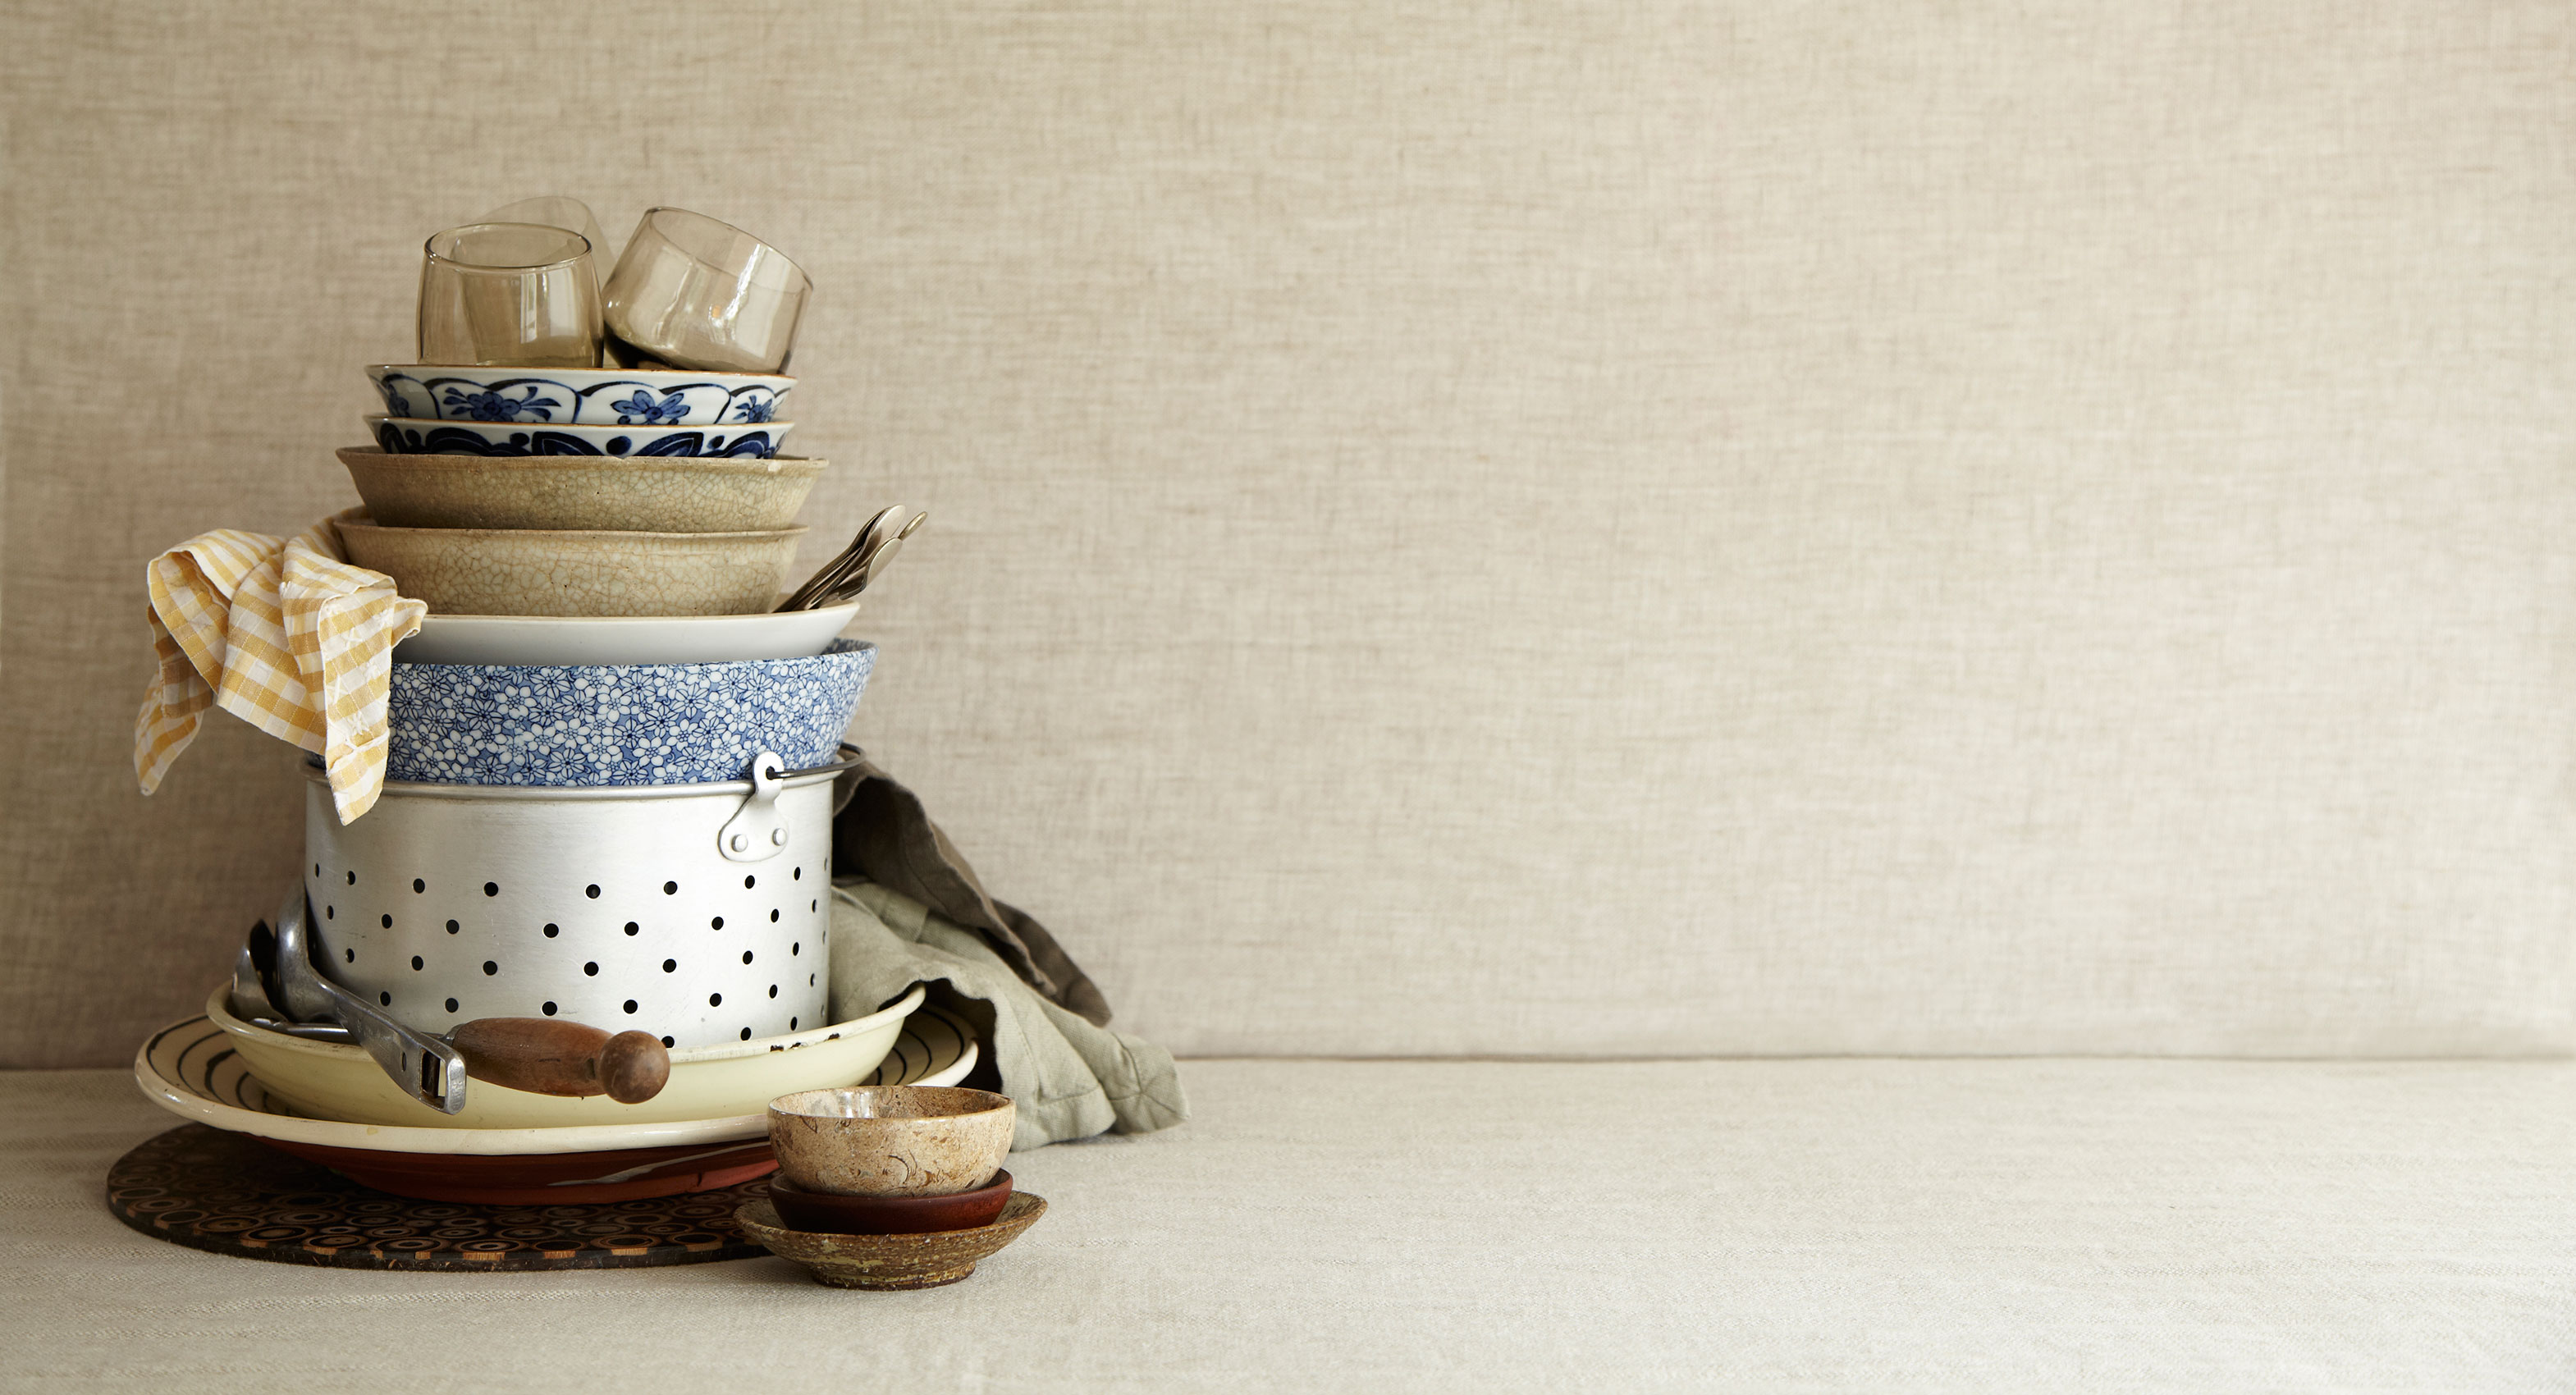 Everyday • Pasta Tableware Stacked in Colander with Tea Towels • Hospitality & Editorial Food Photography